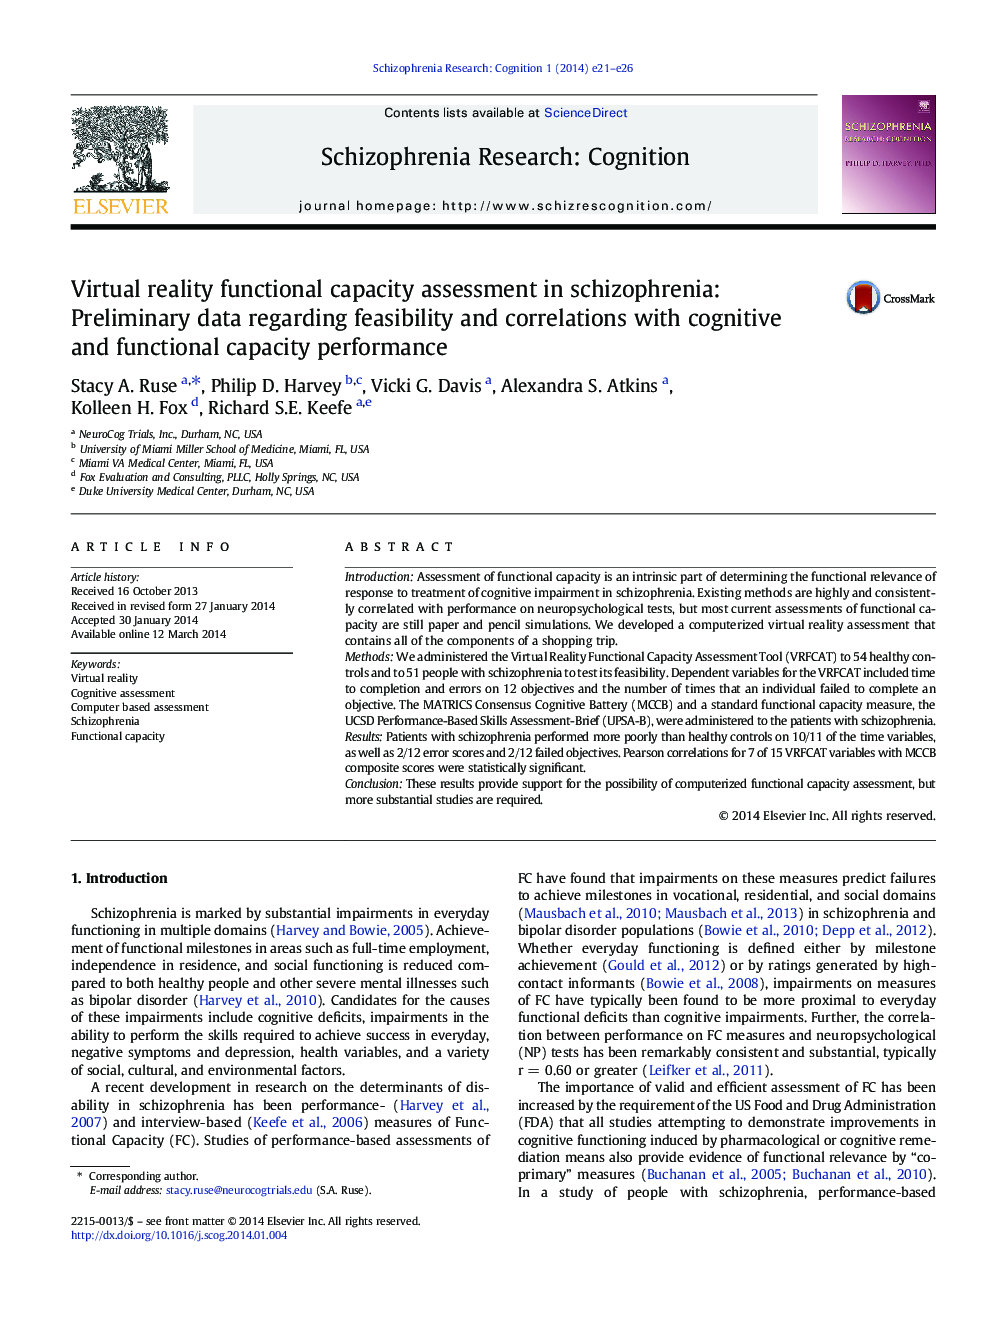 Virtual reality functional capacity assessment in schizophrenia: Preliminary data regarding feasibility and correlations with cognitive and functional capacity performance 